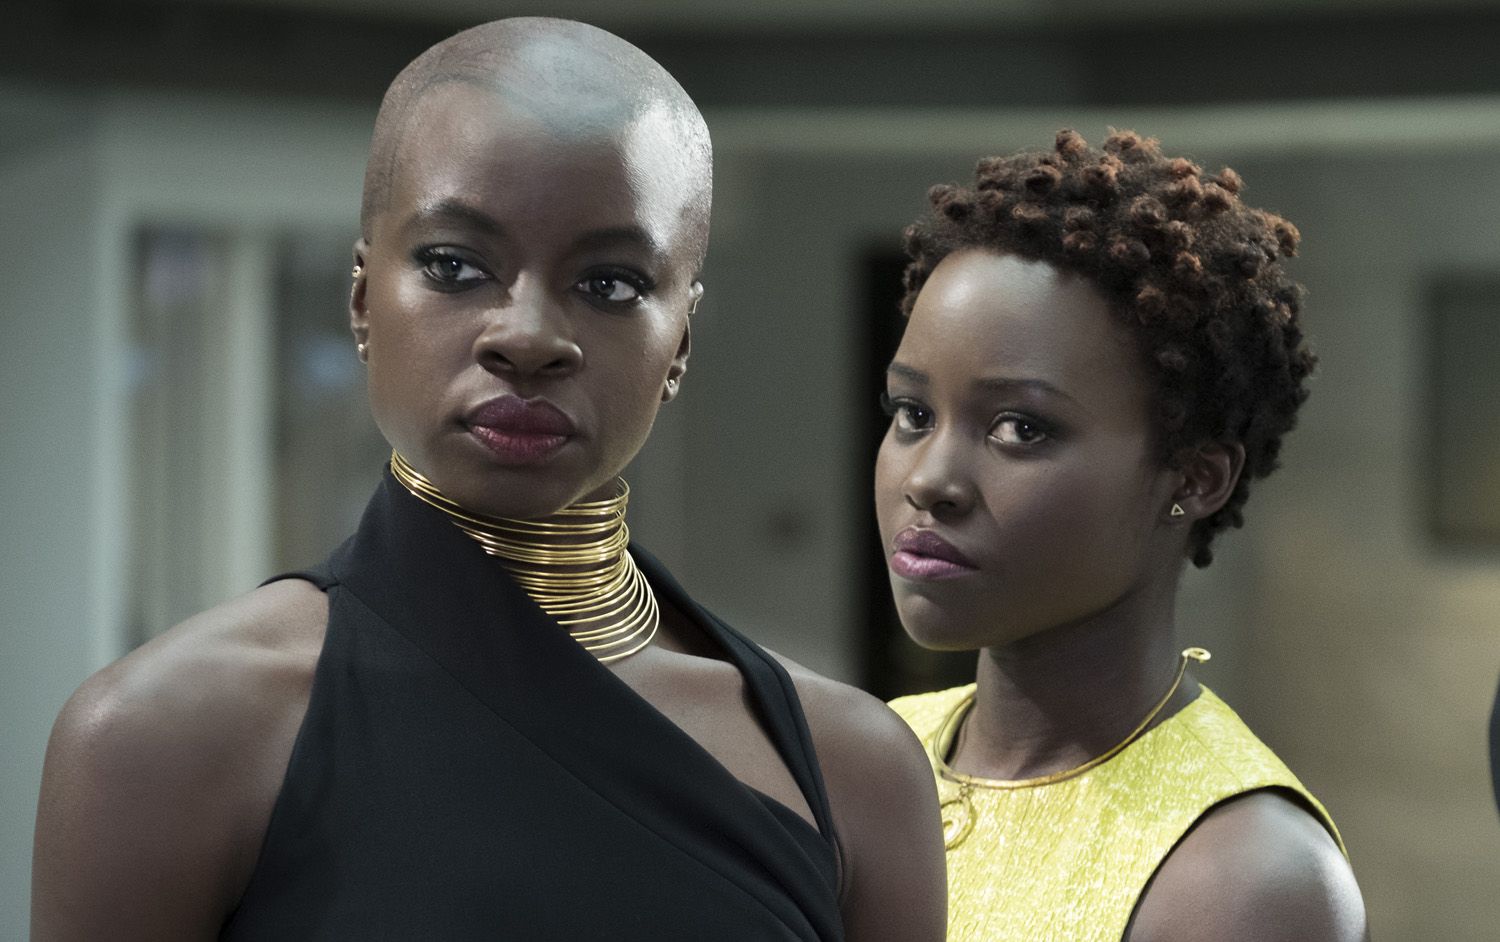 The Most Important Debate in Black Panther Is, Unsurprisingly, Between Two Women